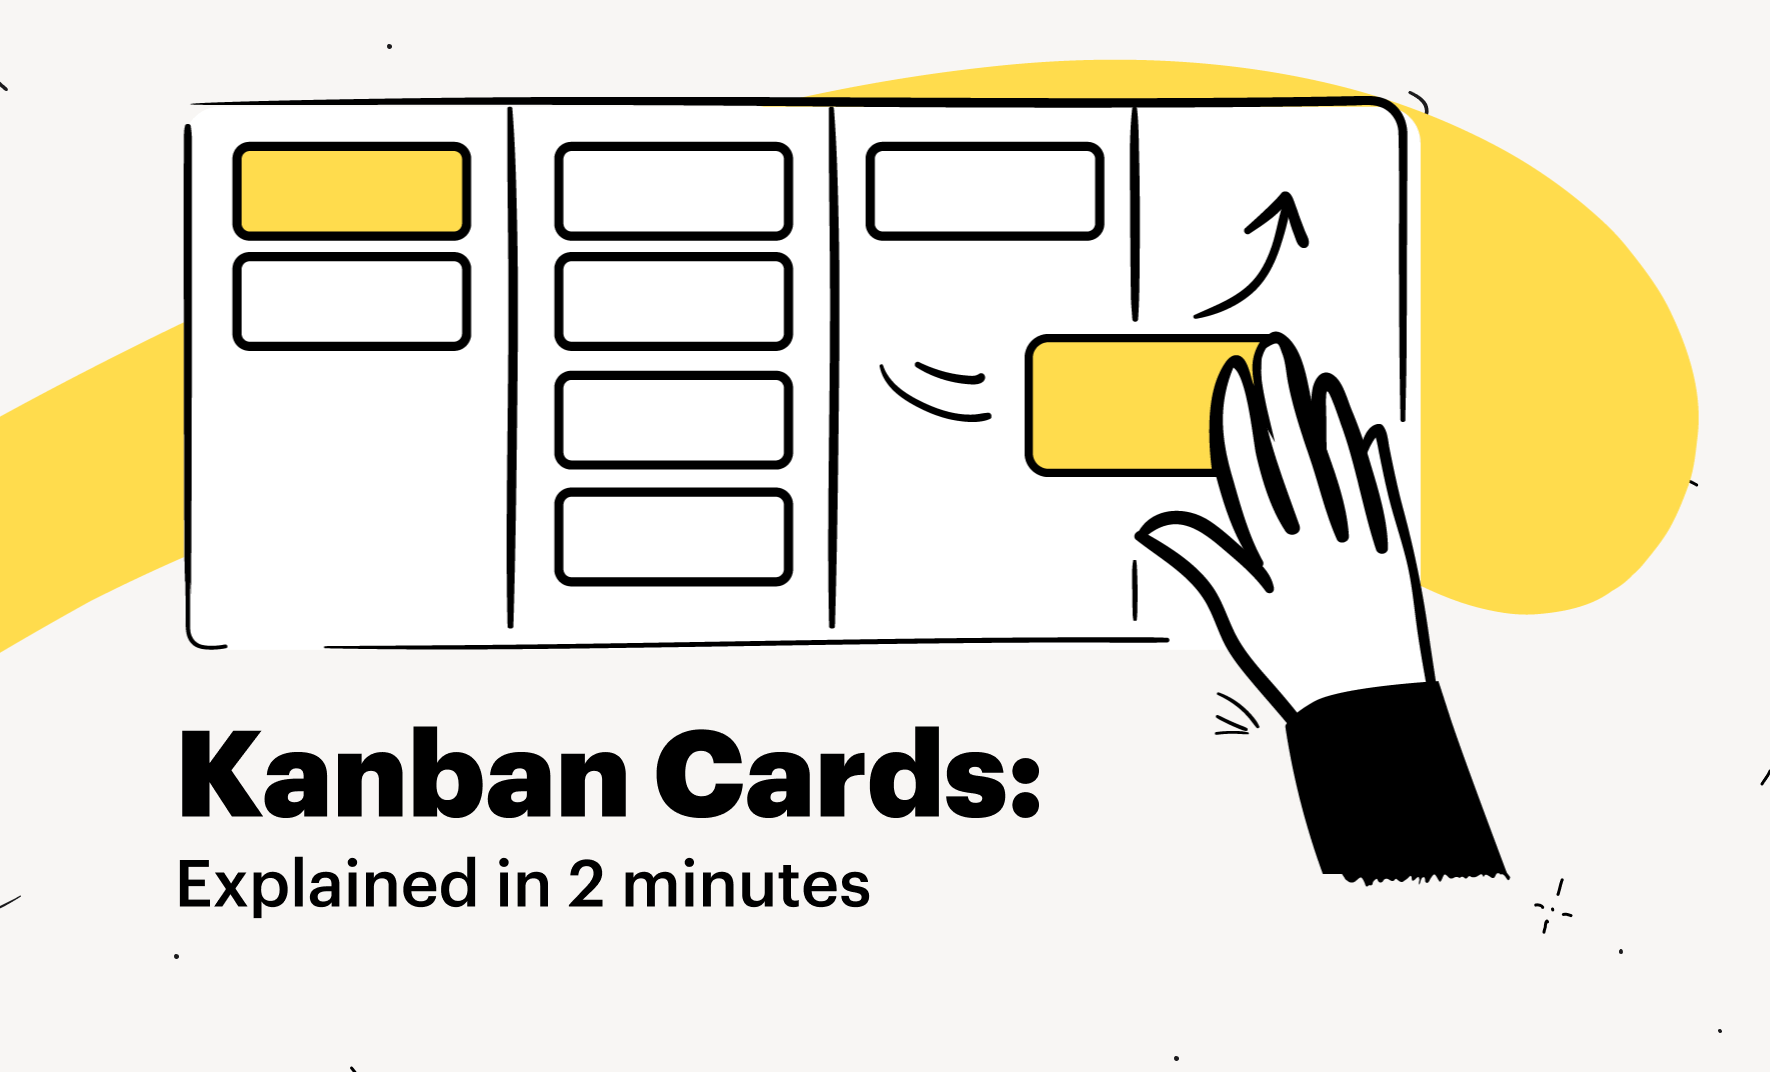 Kanban Cards: Explained in 2 minutes